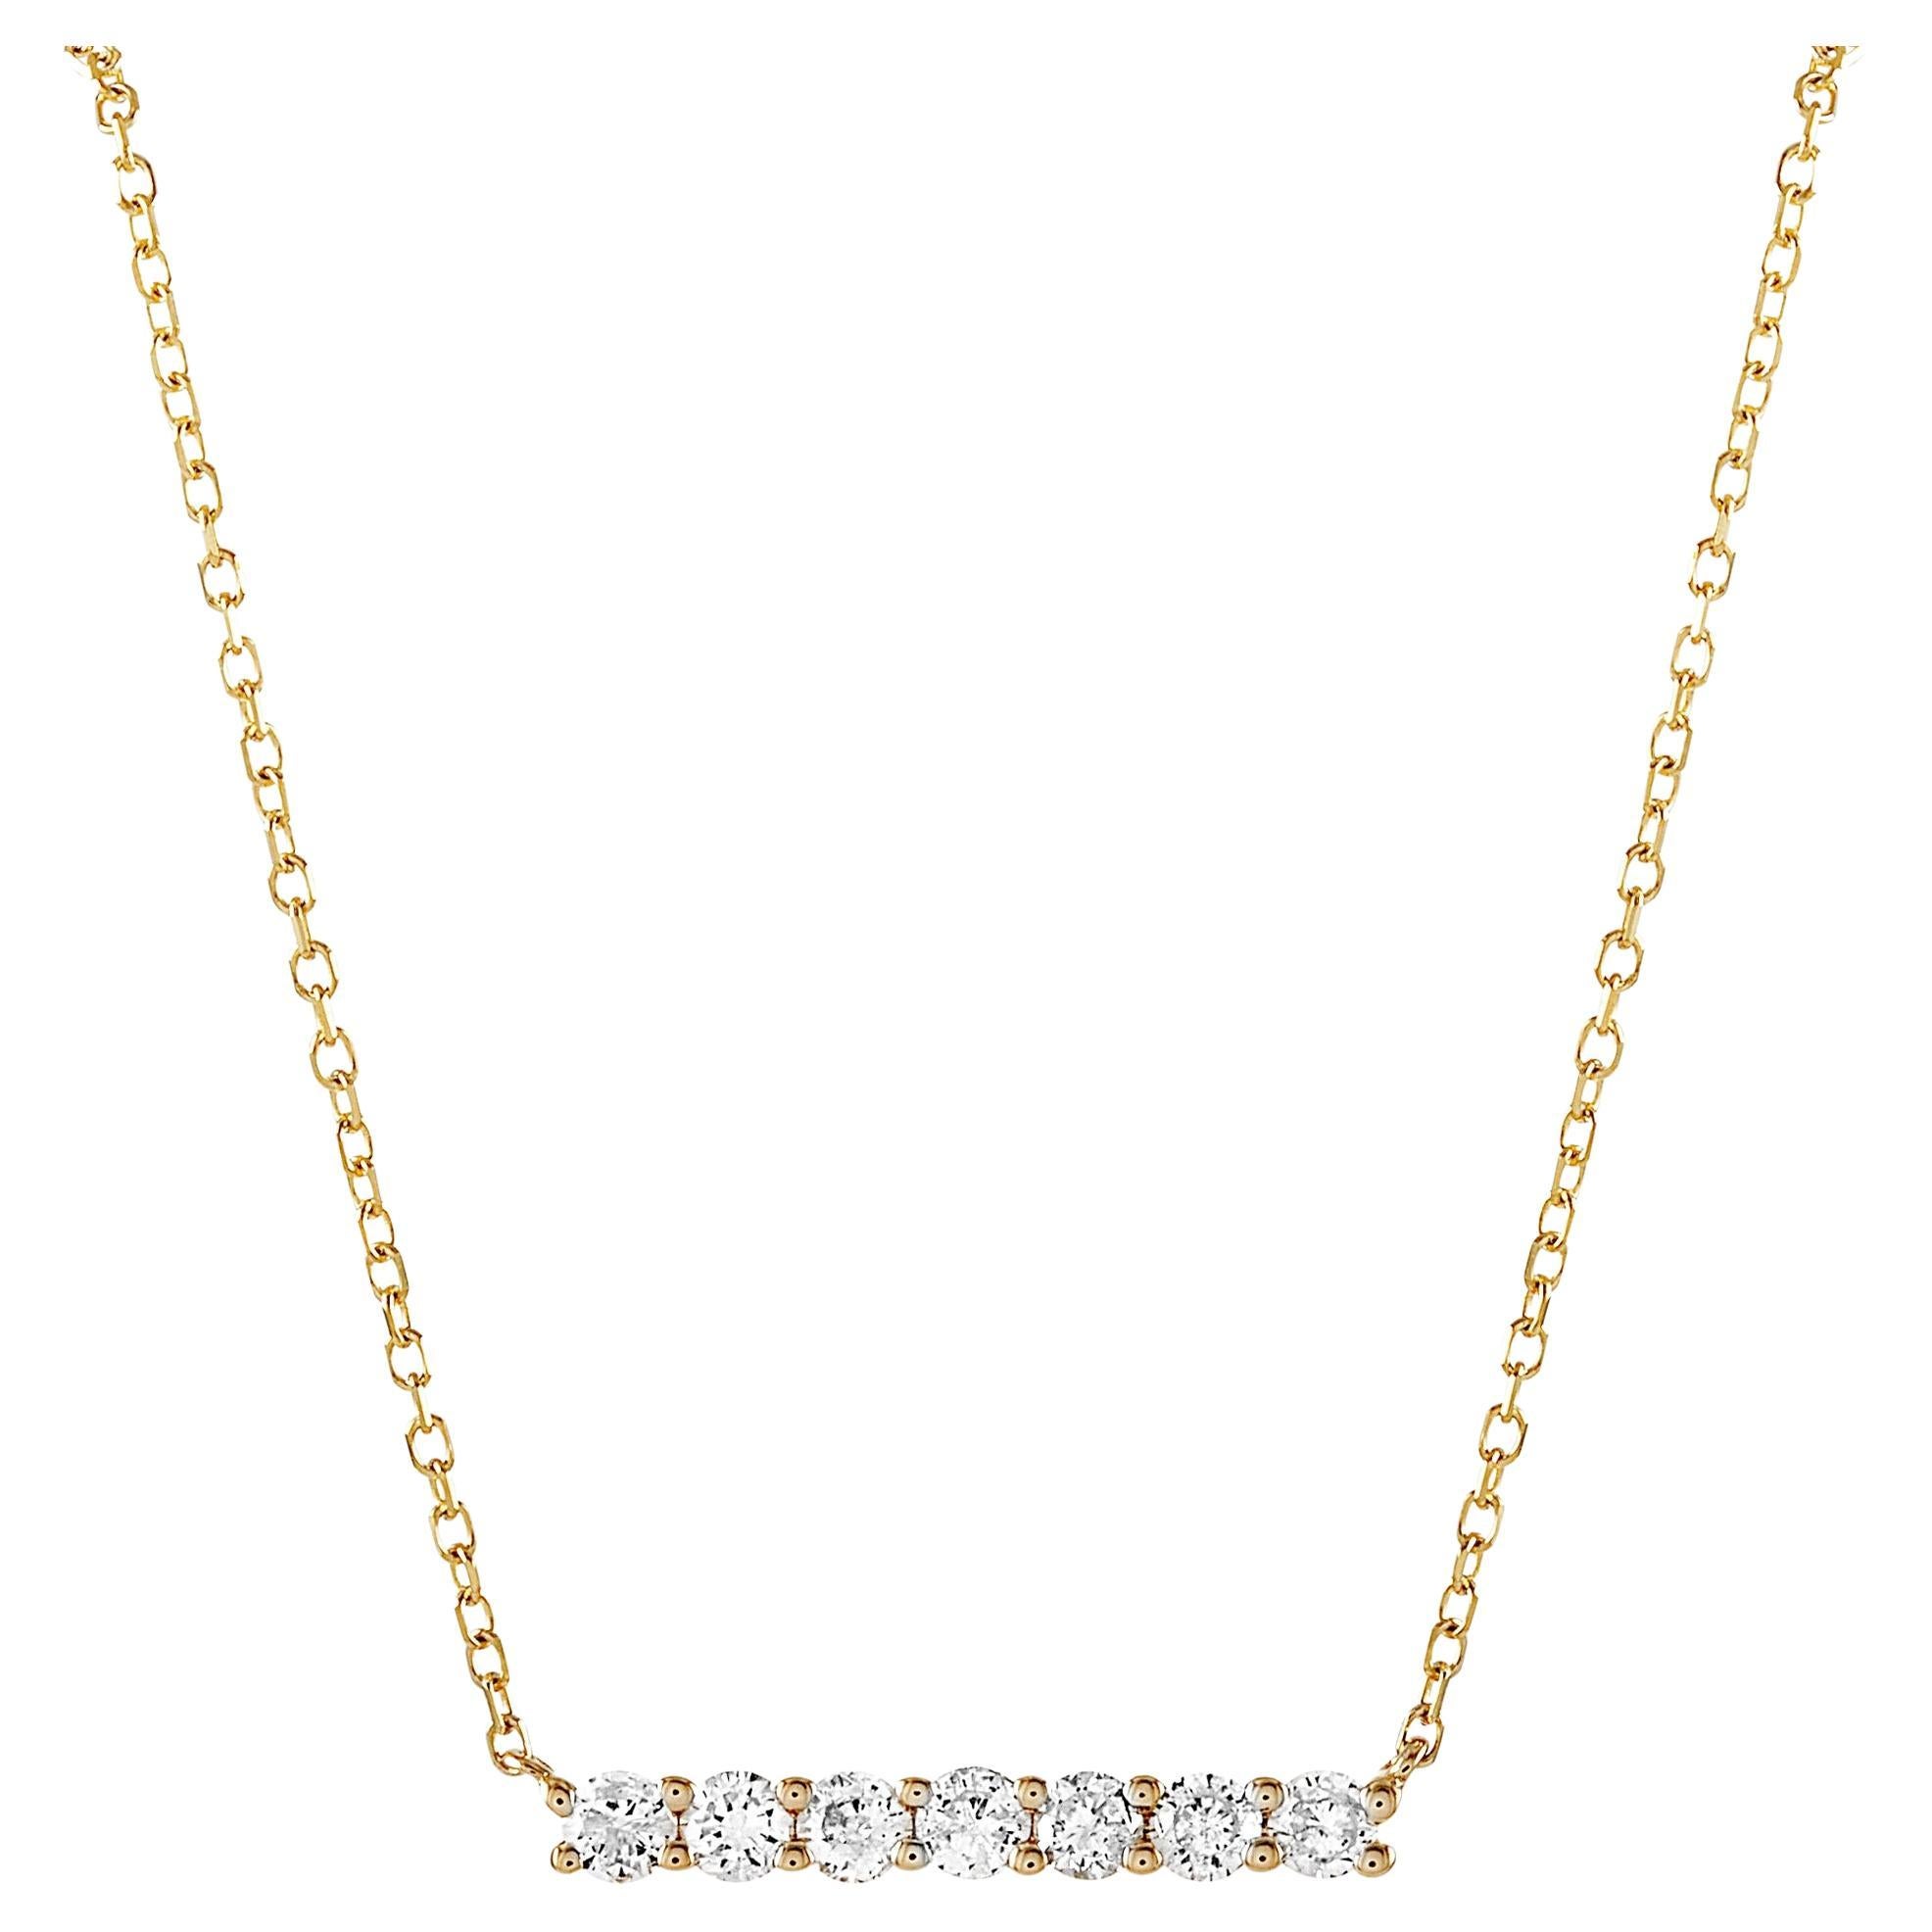 Lb Exclusive 14k Yellow Gold 0.25 Carat Diamond Bar Necklace For Sale